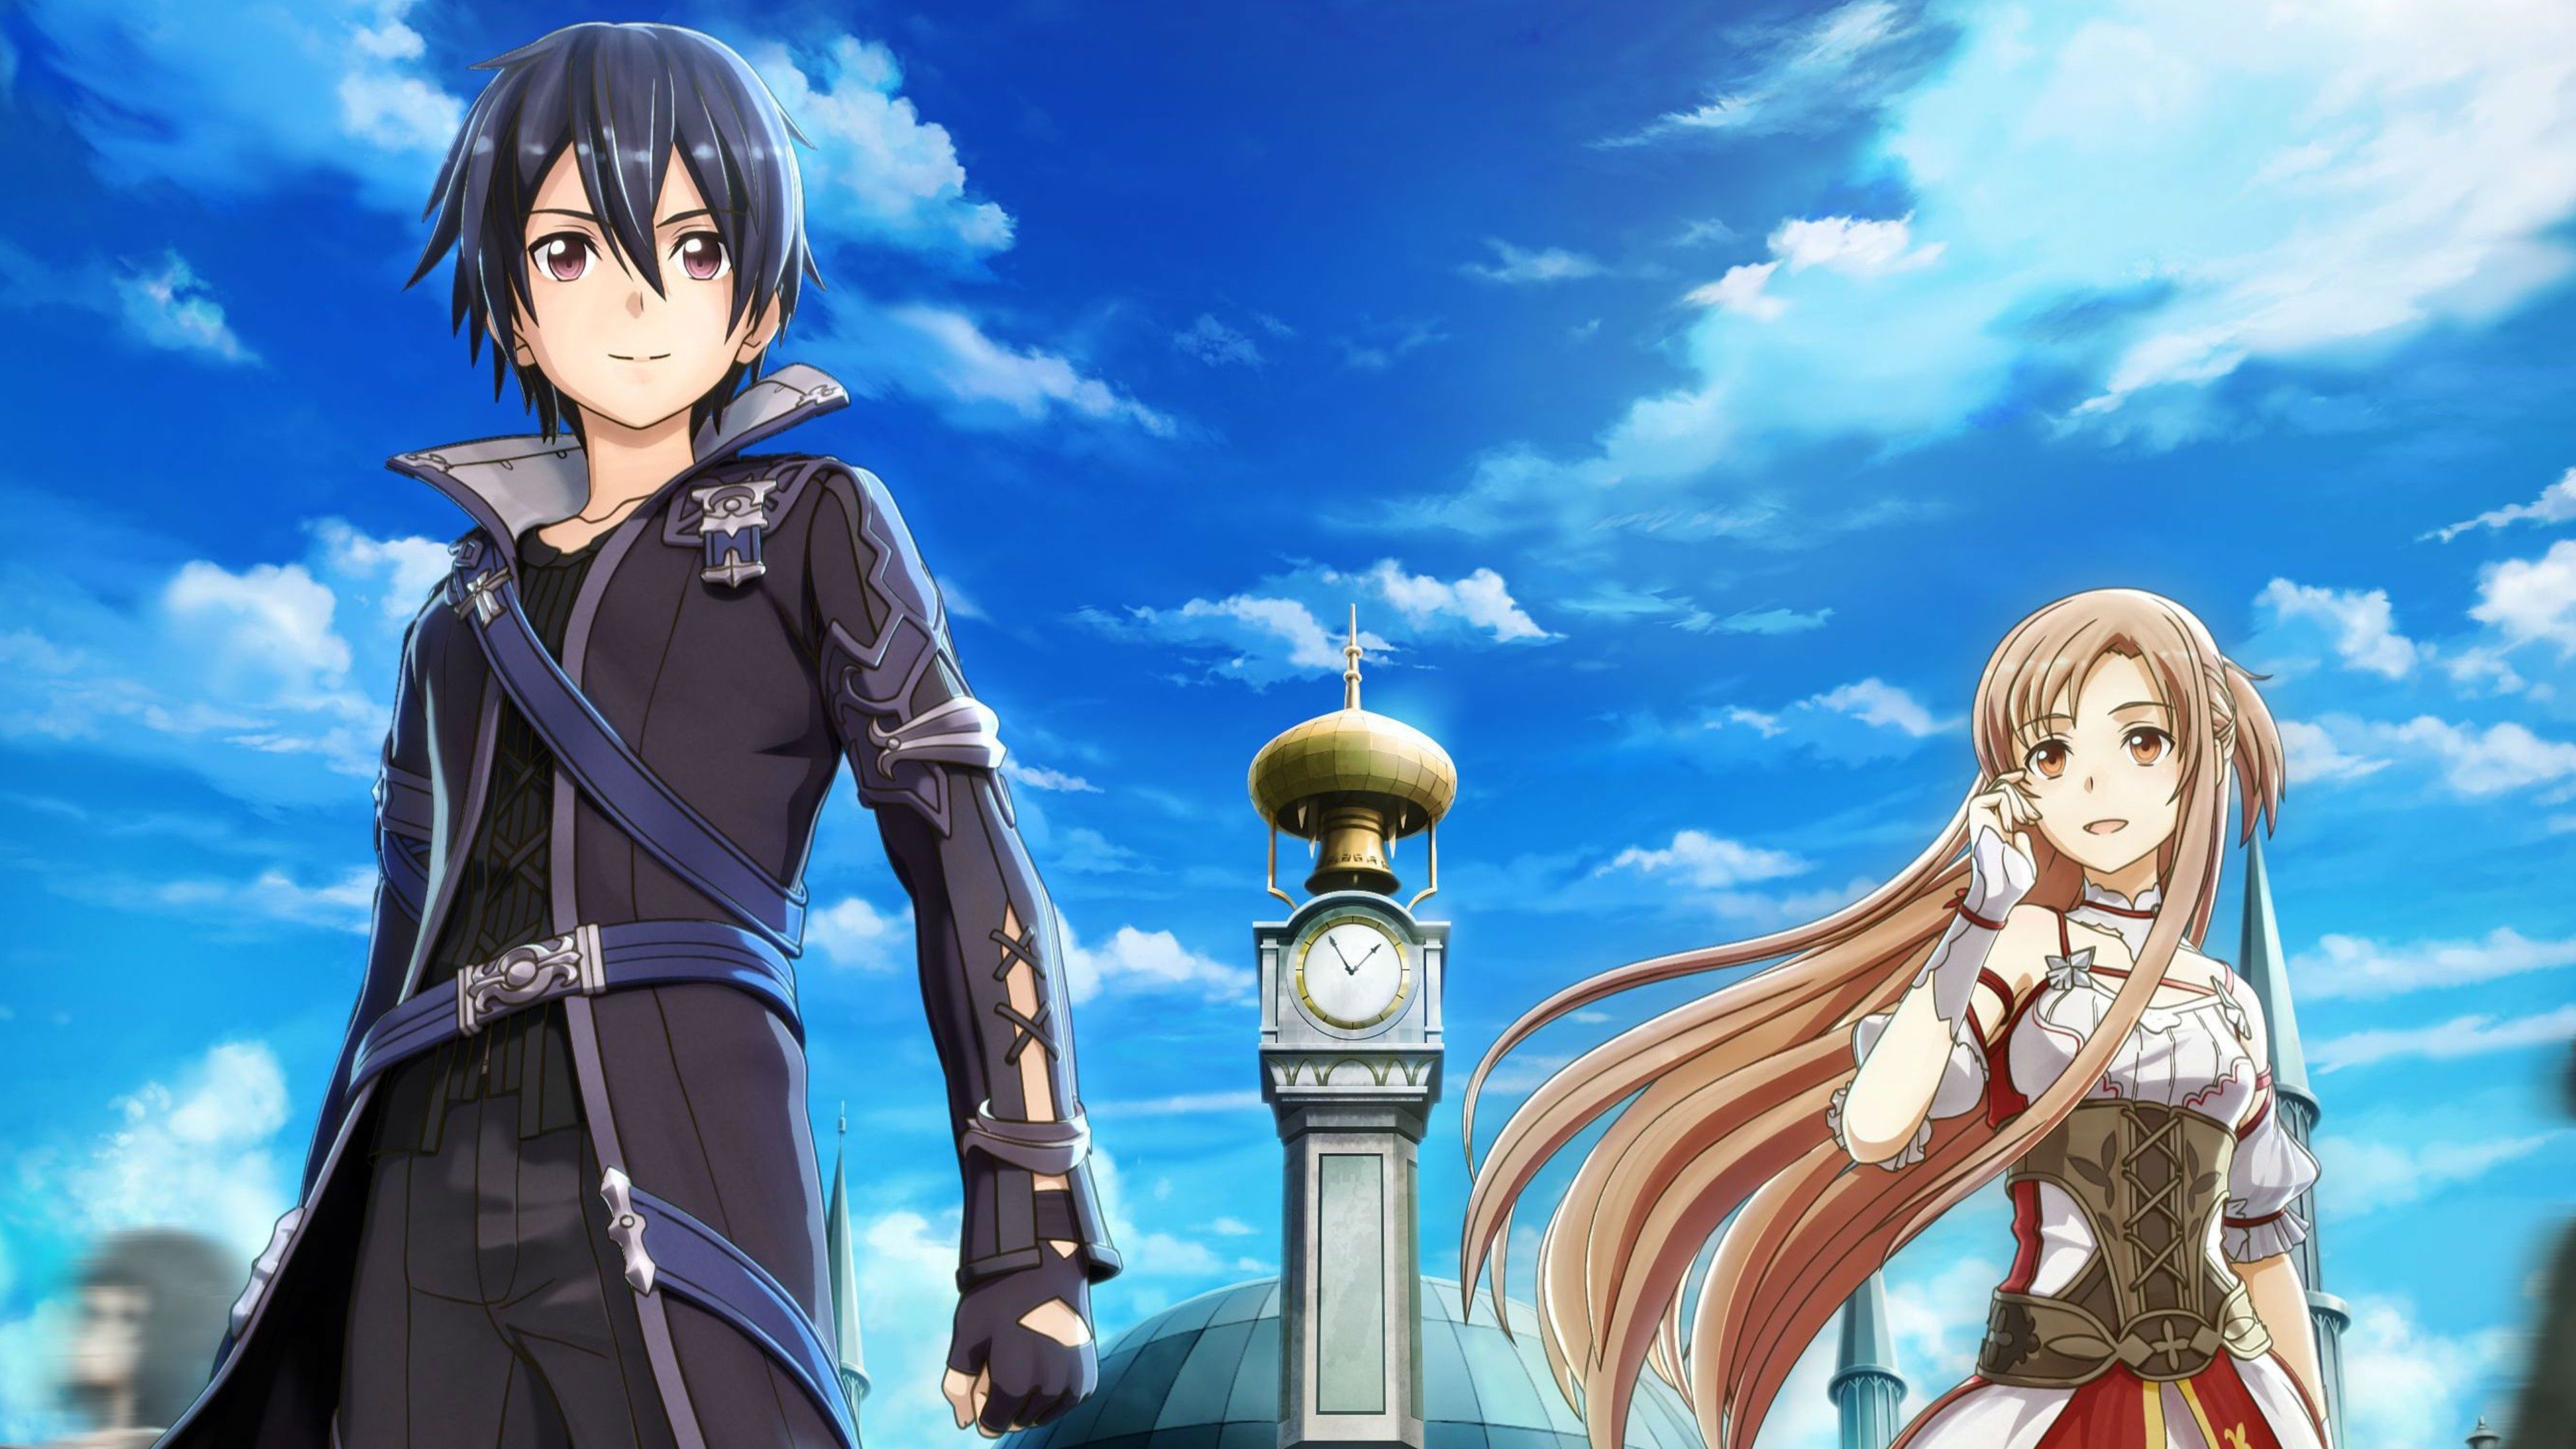 SAO Wallpapers and Backgrounds - WallpaperCG